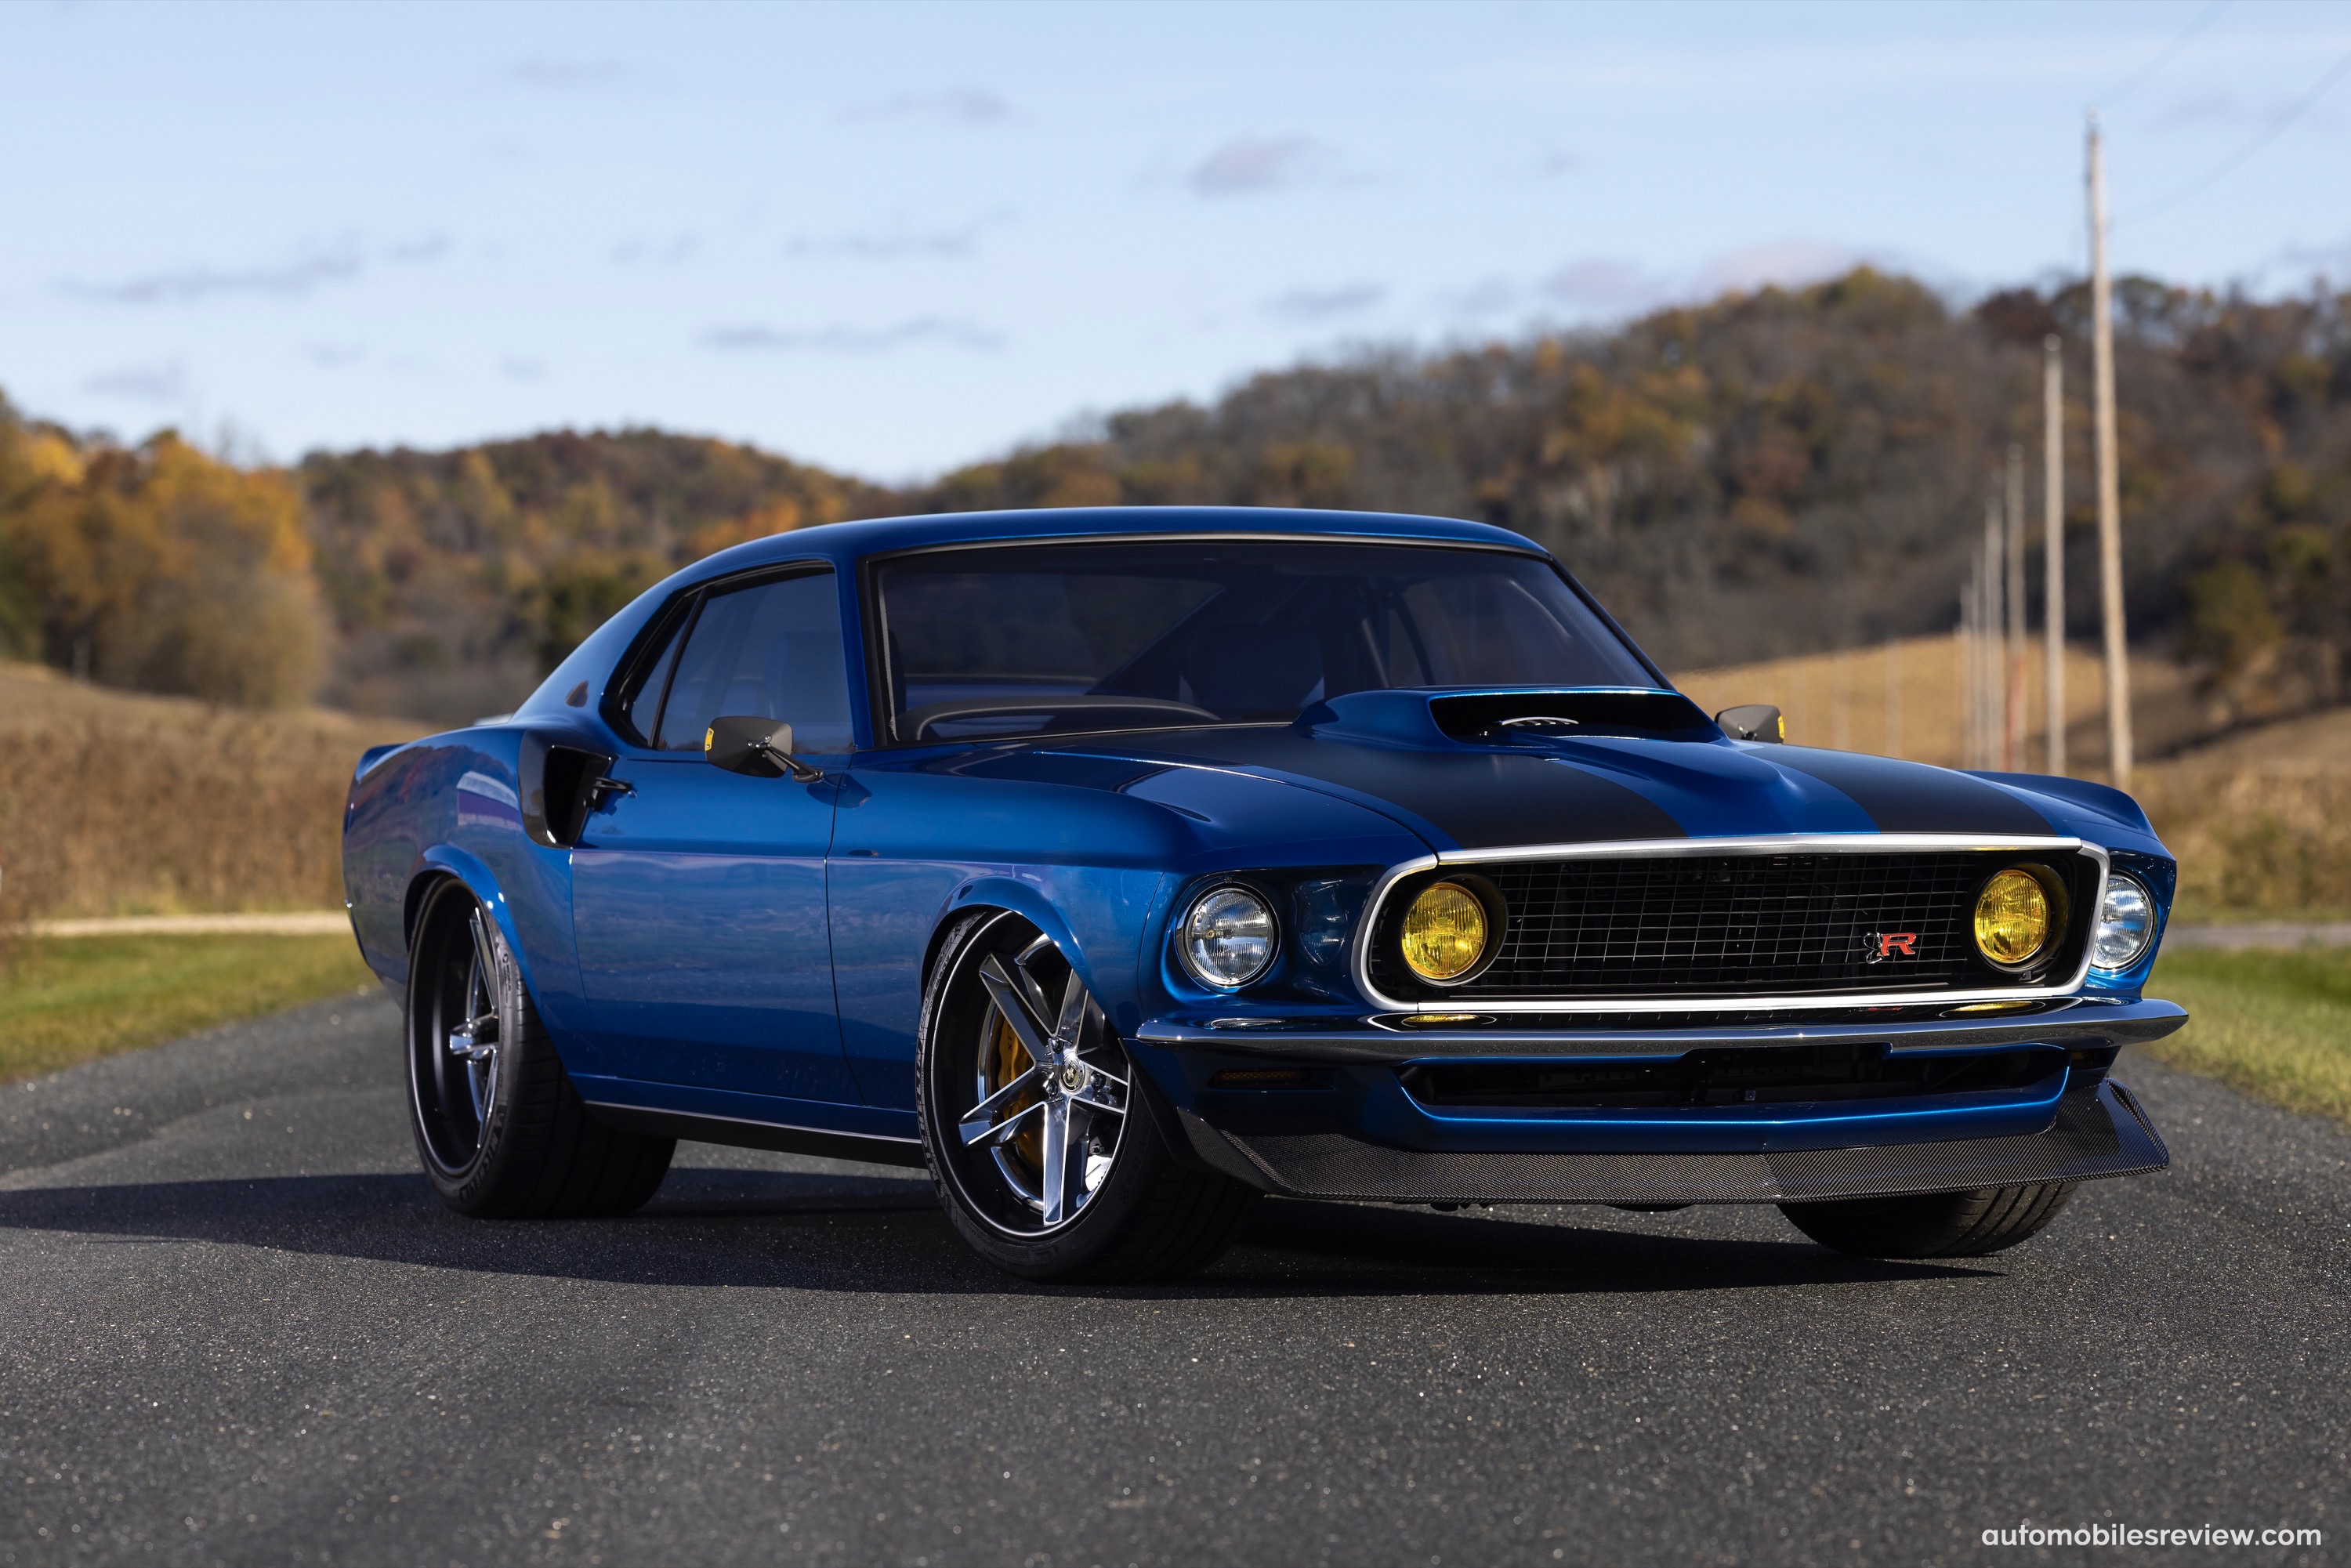 Ringbrothers Ford Mustang Mach 1 PATRIARC (1969) - pictures & information